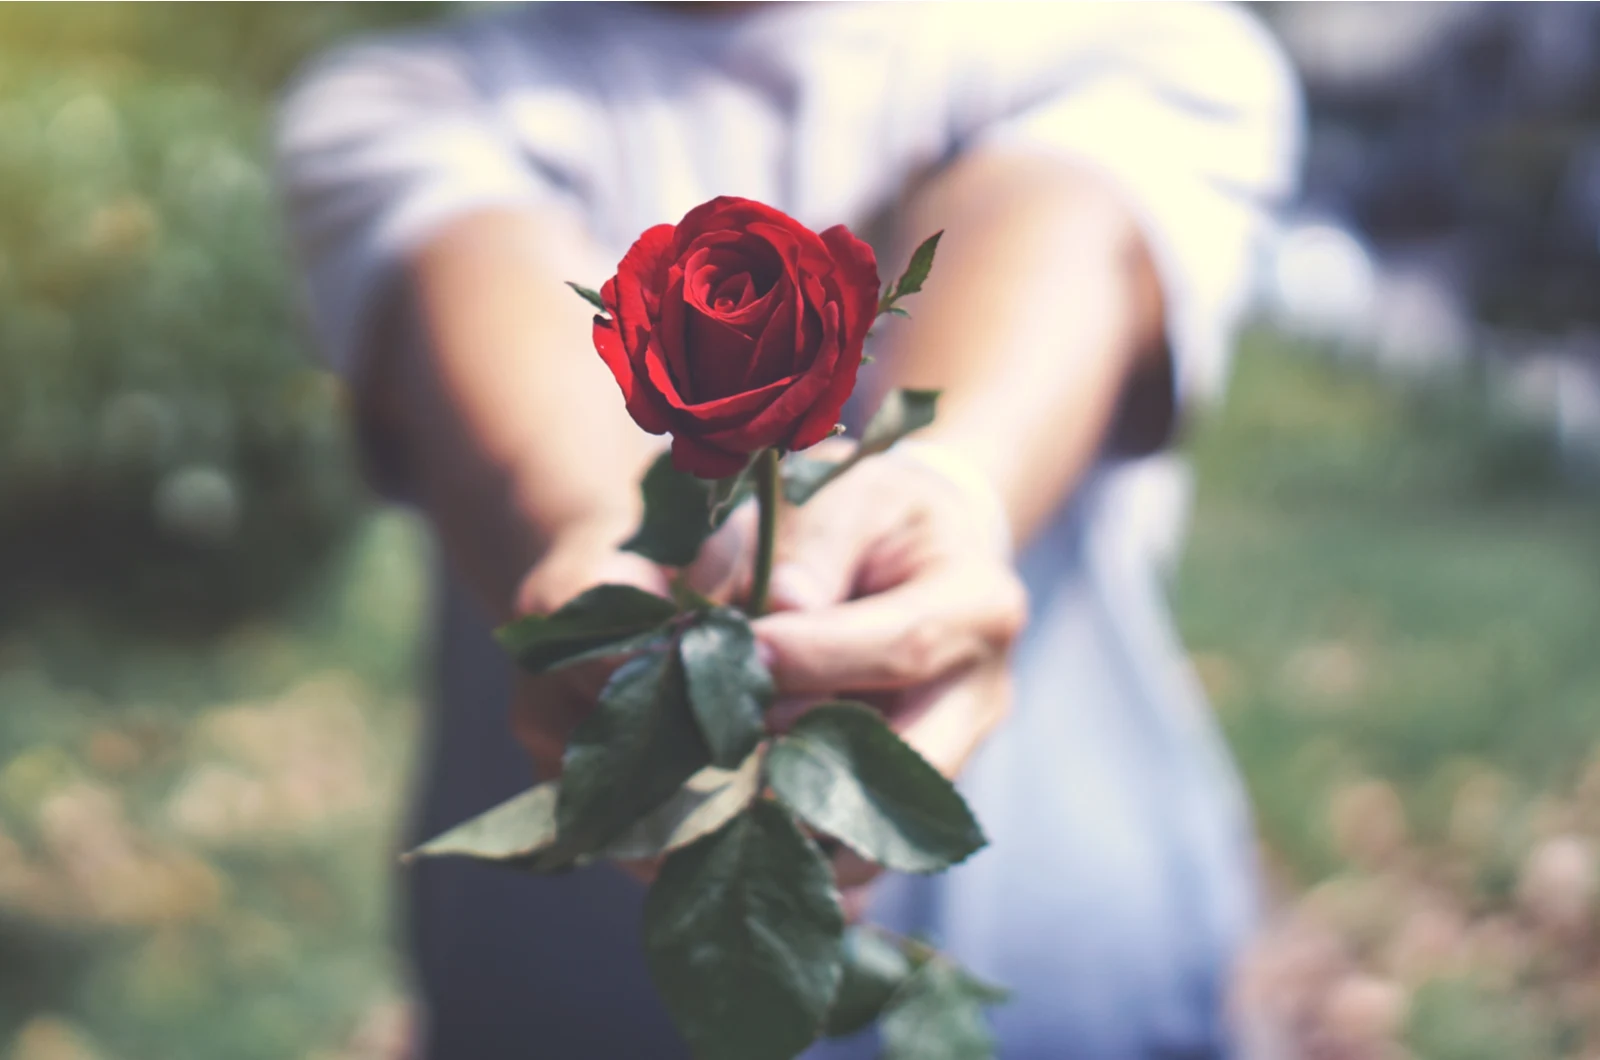 the woman holds a red rose in her hand